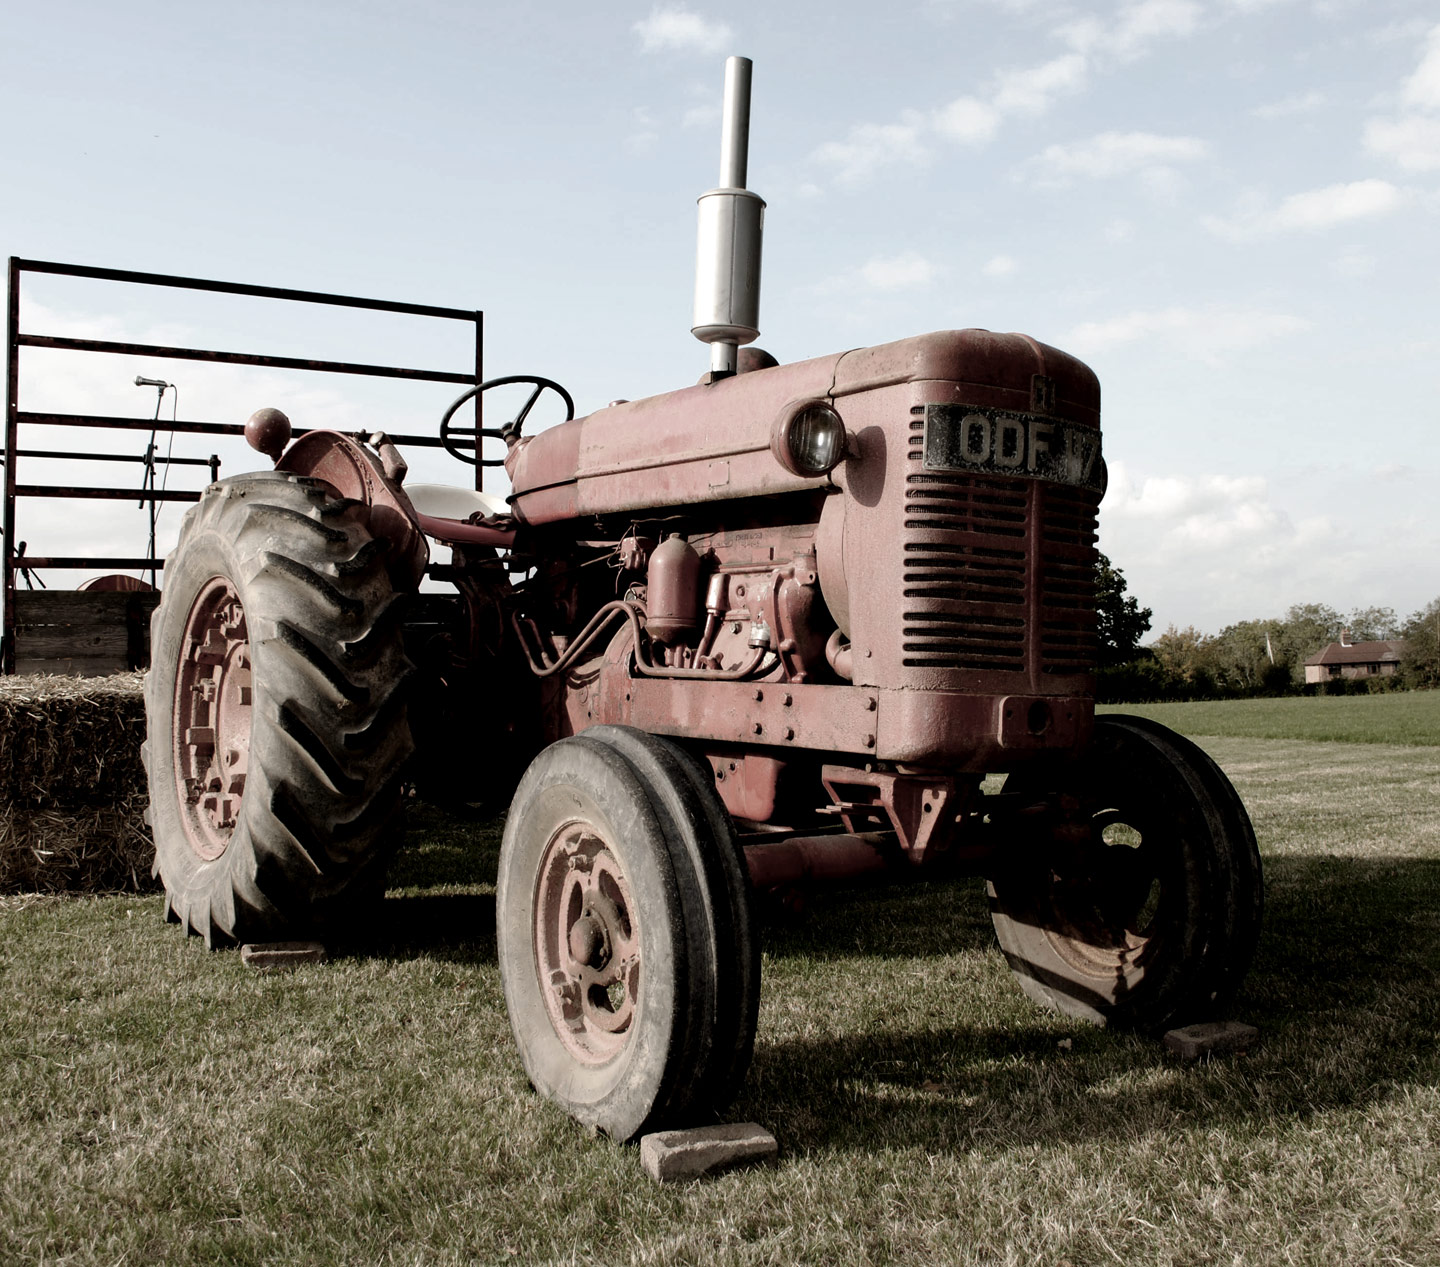 ICMSTUDIOS - Lovely Old tractor